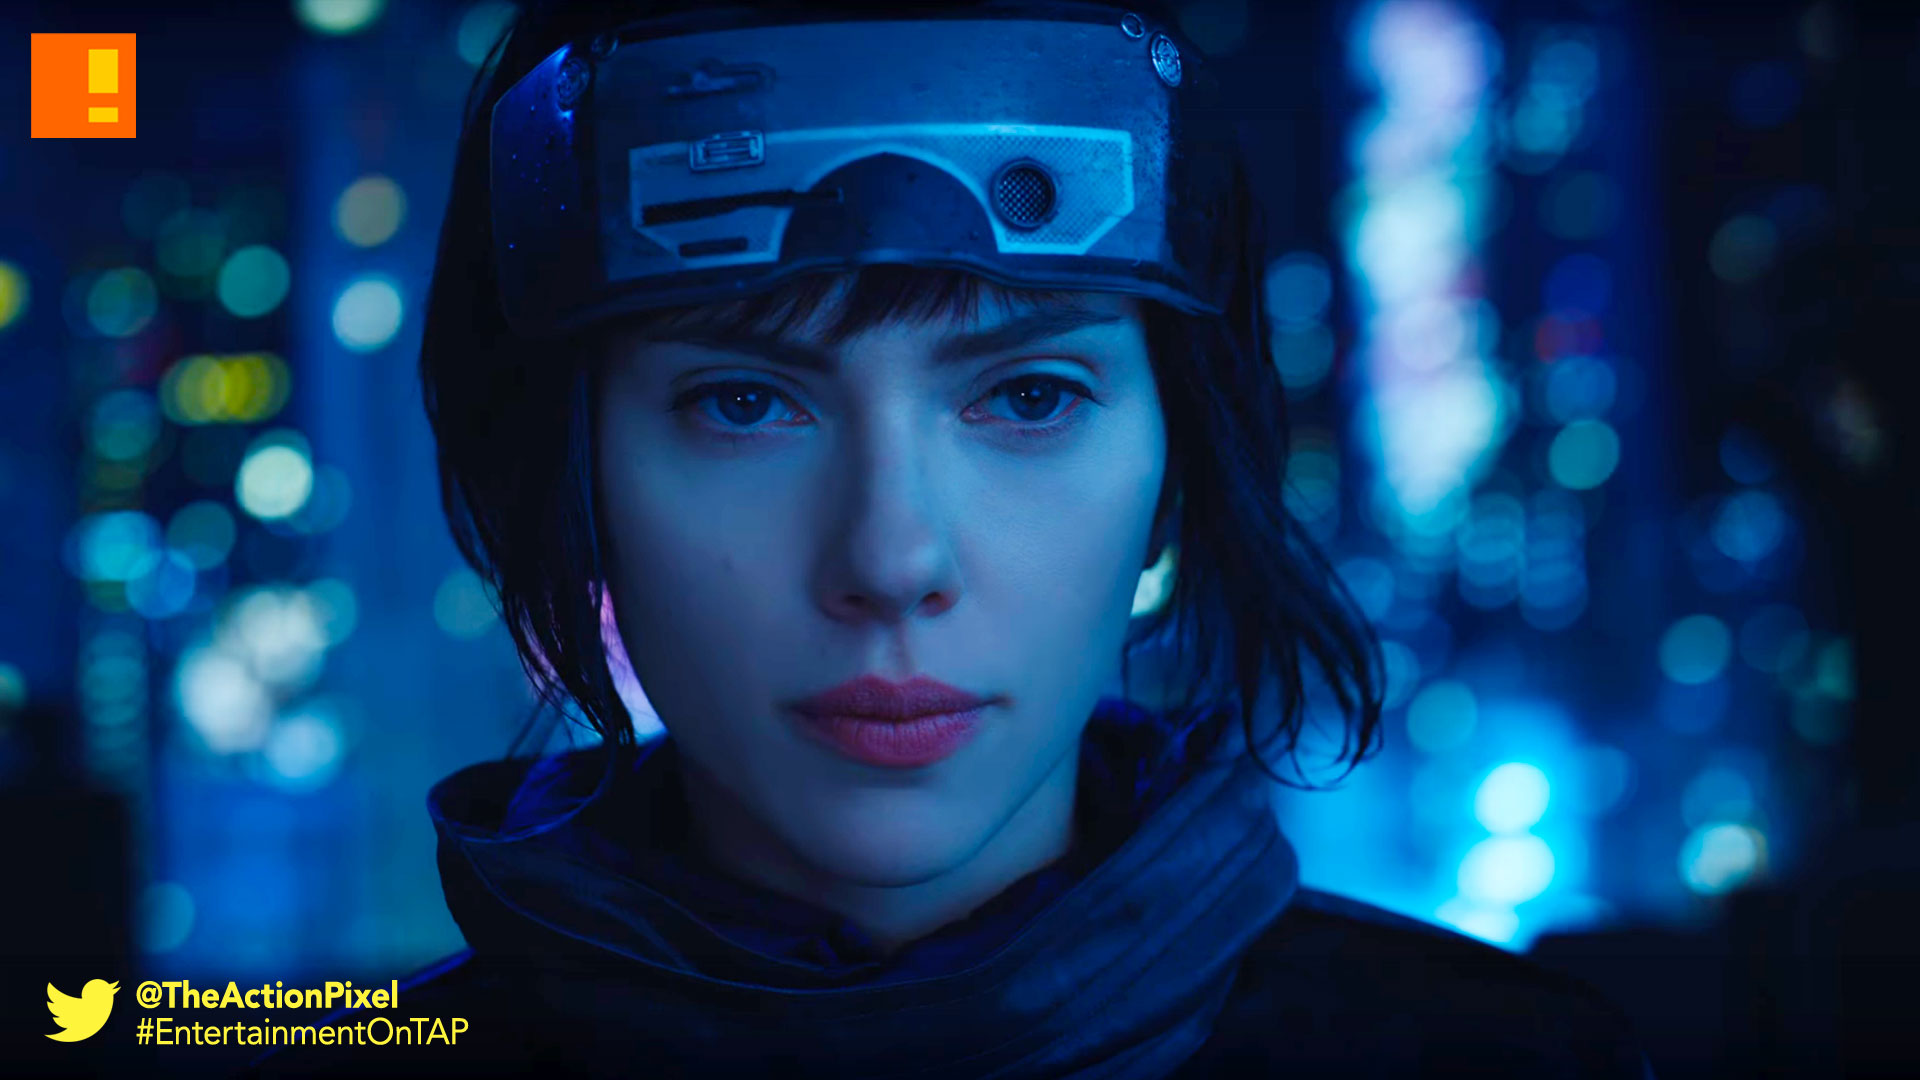 gits,trailer, major, trailer, ghost in the shell, paramount pictures, the action pixel, entertainment on tap